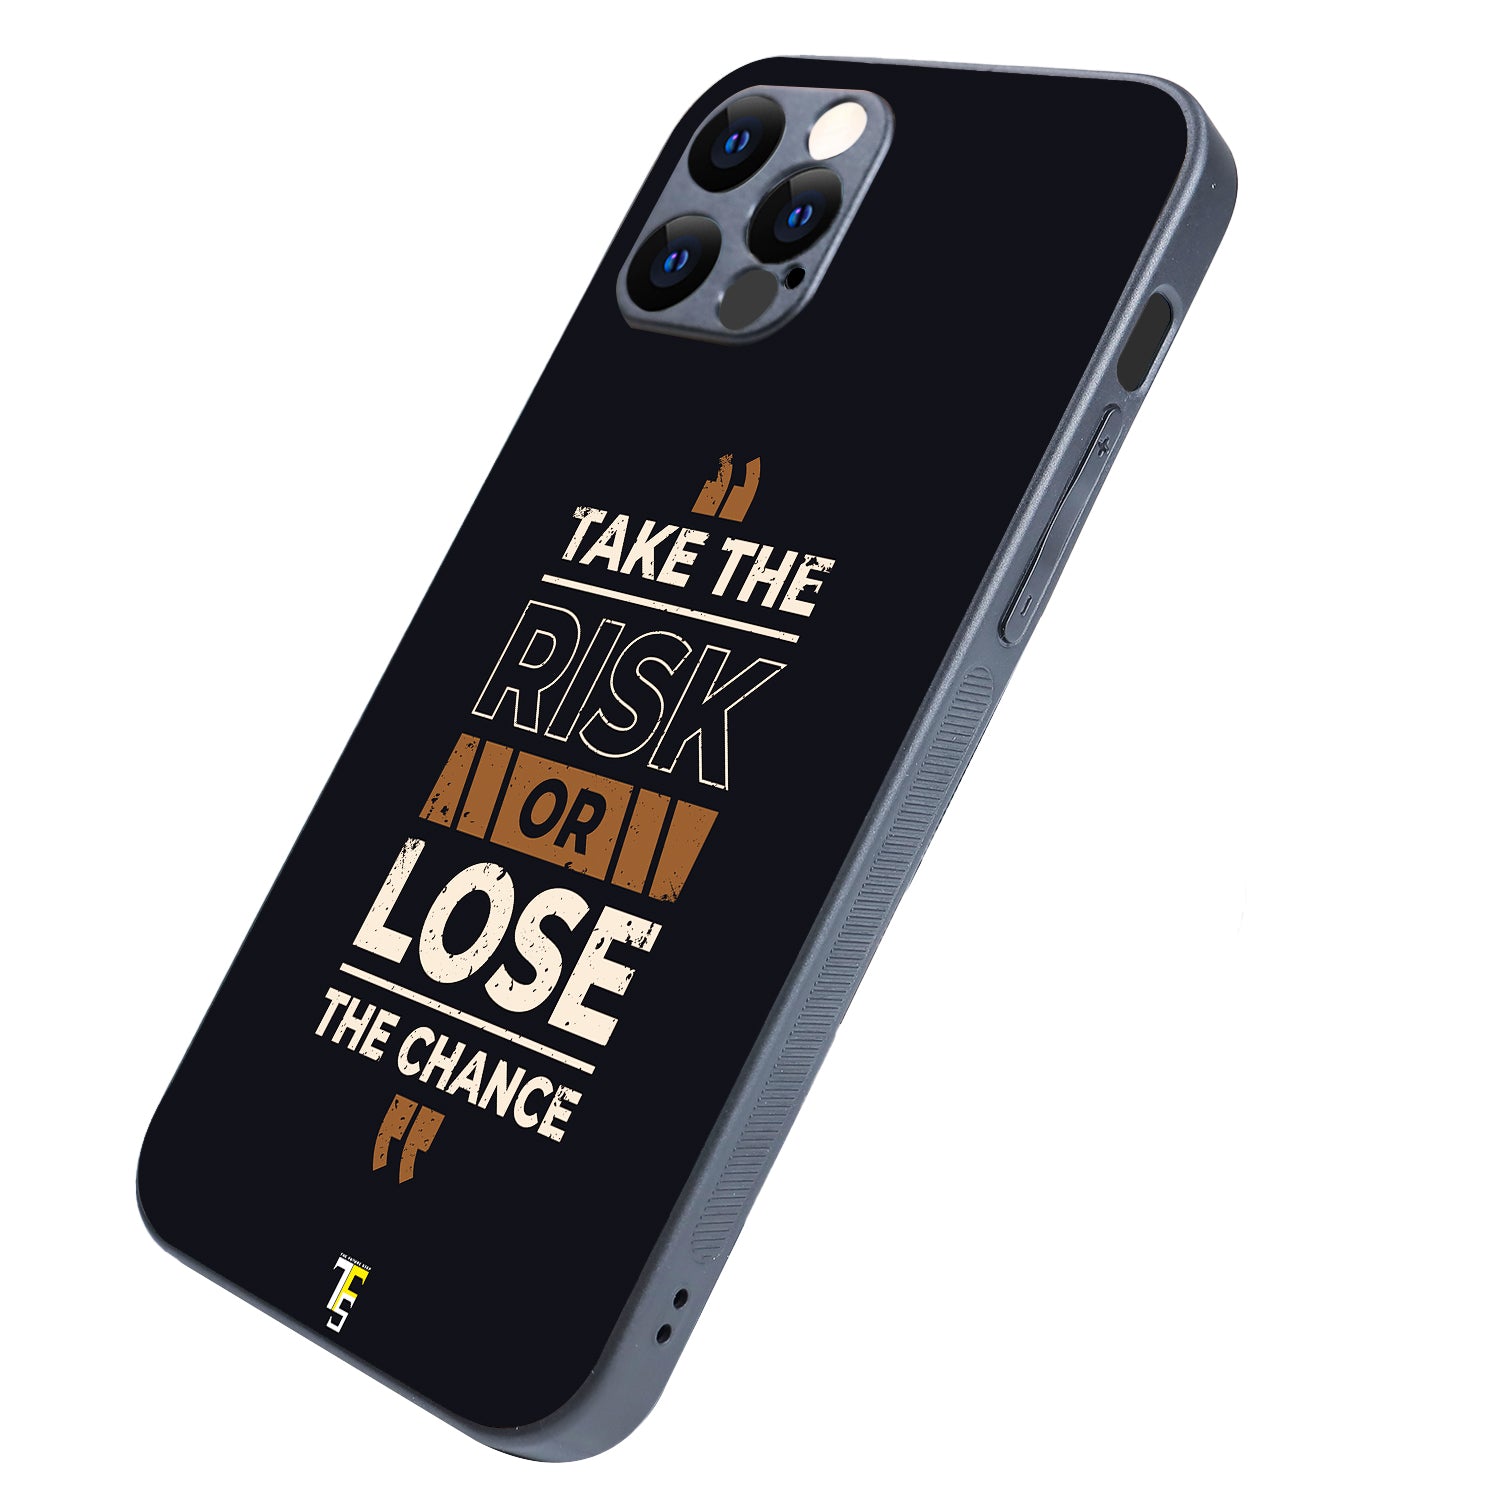 Take Risk Trading iPhone 12 Pro Case